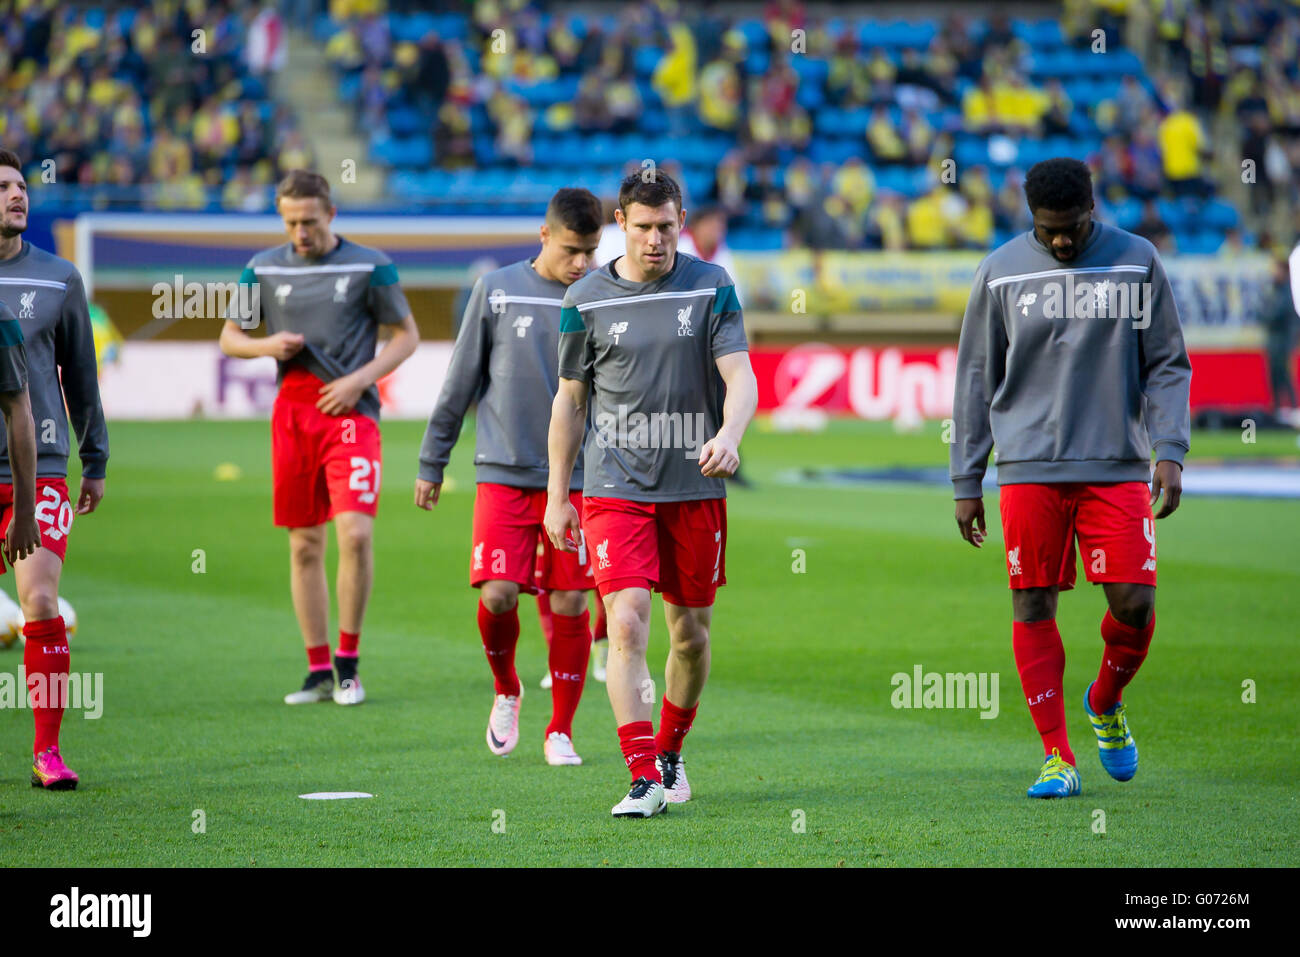 Villarreal, Spain. 28th April, 2016. James Milner warms up prior to the Europa League semifinal match between Villarreal CF and Liverpool FC at the El Madrigal Stadium on April 28, 2016 in Villarreal, Spain. Credit:  Christian Bertrand/Alamy Live News Stock Photo